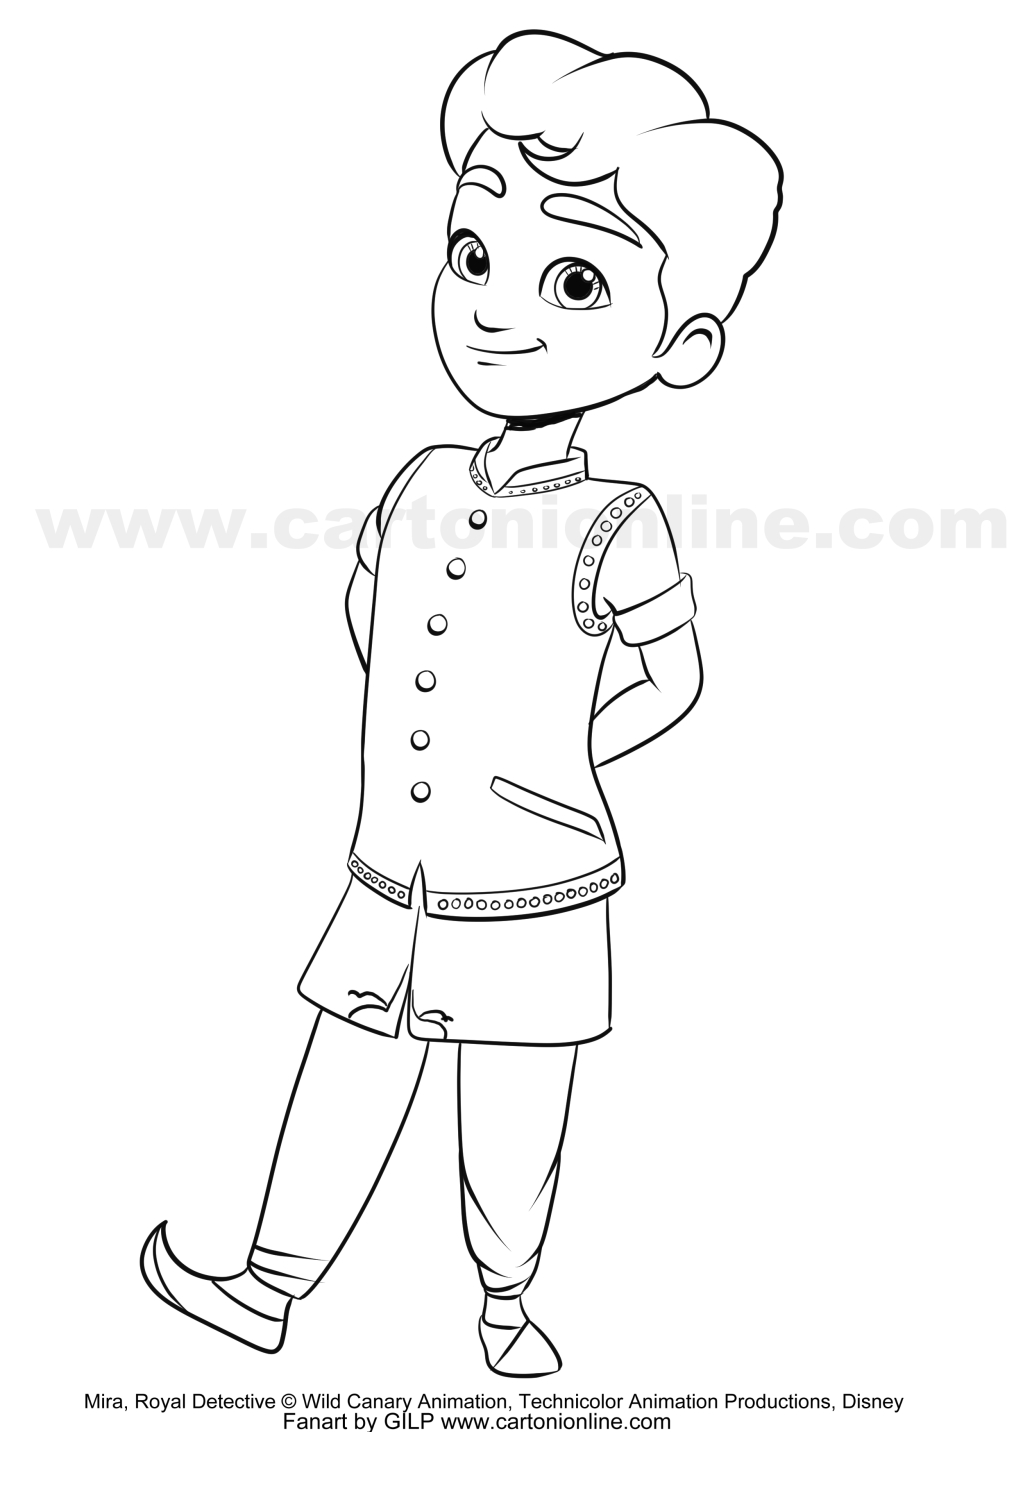 Neel from Mira, Royal Detective coloring page to print and coloring